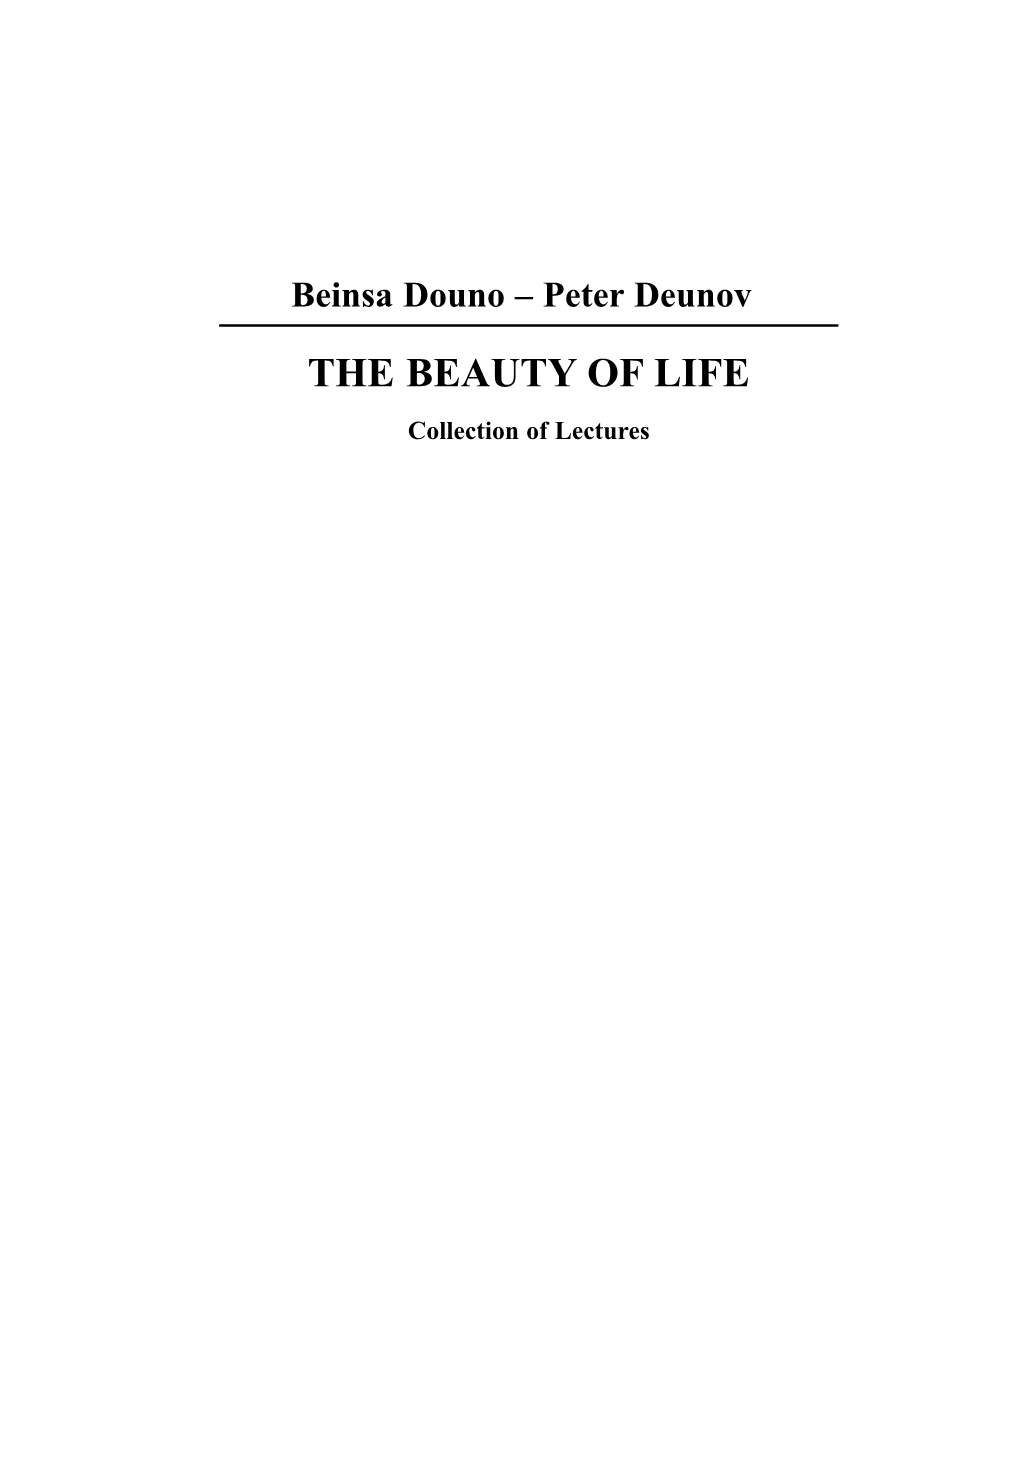 Beinsa Douno – Peter Deunov the BEAUTY of LIFE Collection of Lectures